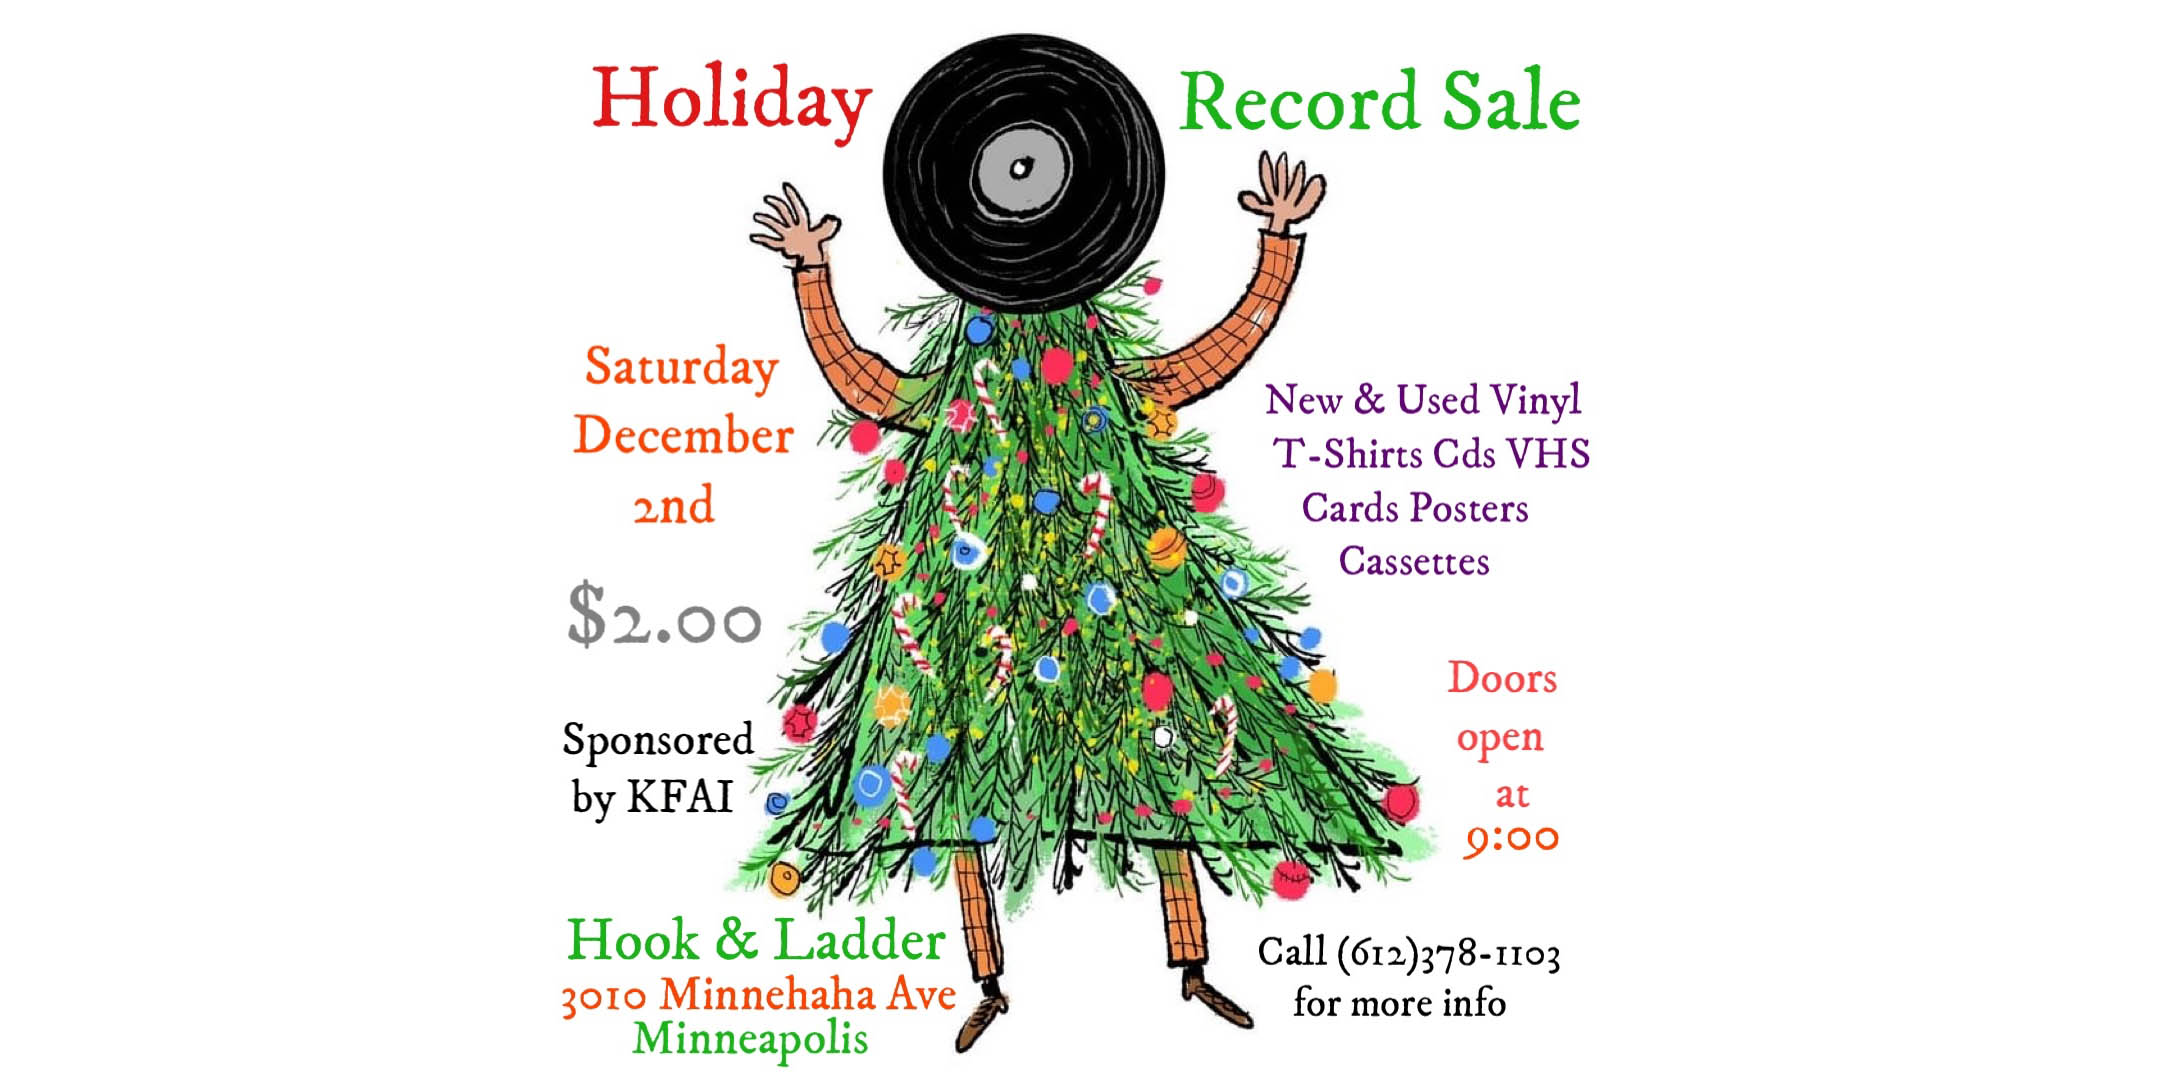 MN Record Show The largest and longest-running record show in Minnesota! Vinyl LPs • 45s • CDs • DVDs • Tapes • Posters • Books Find dozens of tables of vinyl & vintage rock t-shirts and music related goodies at The Record Show on Saturday December 2, 9am to 3pm.